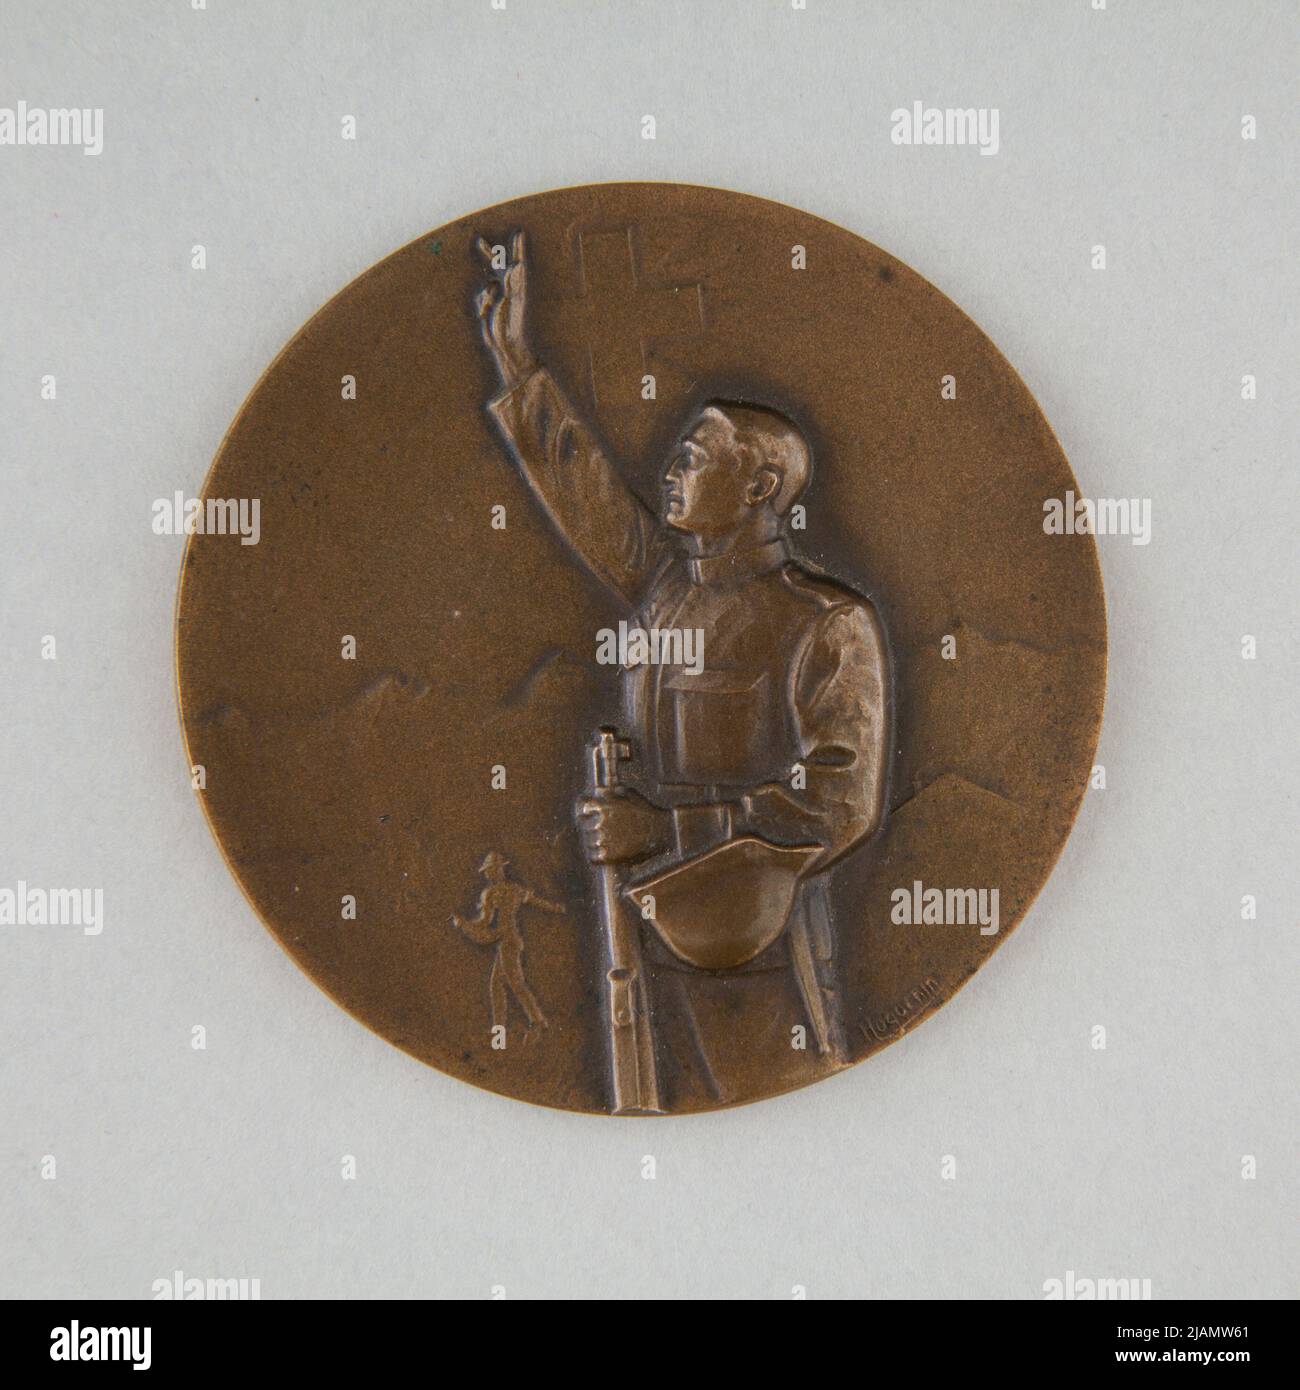 Bronze commemorative medal with the silhouette of sworn Swiss soldier Huguenin Frères & Co Stock Photo